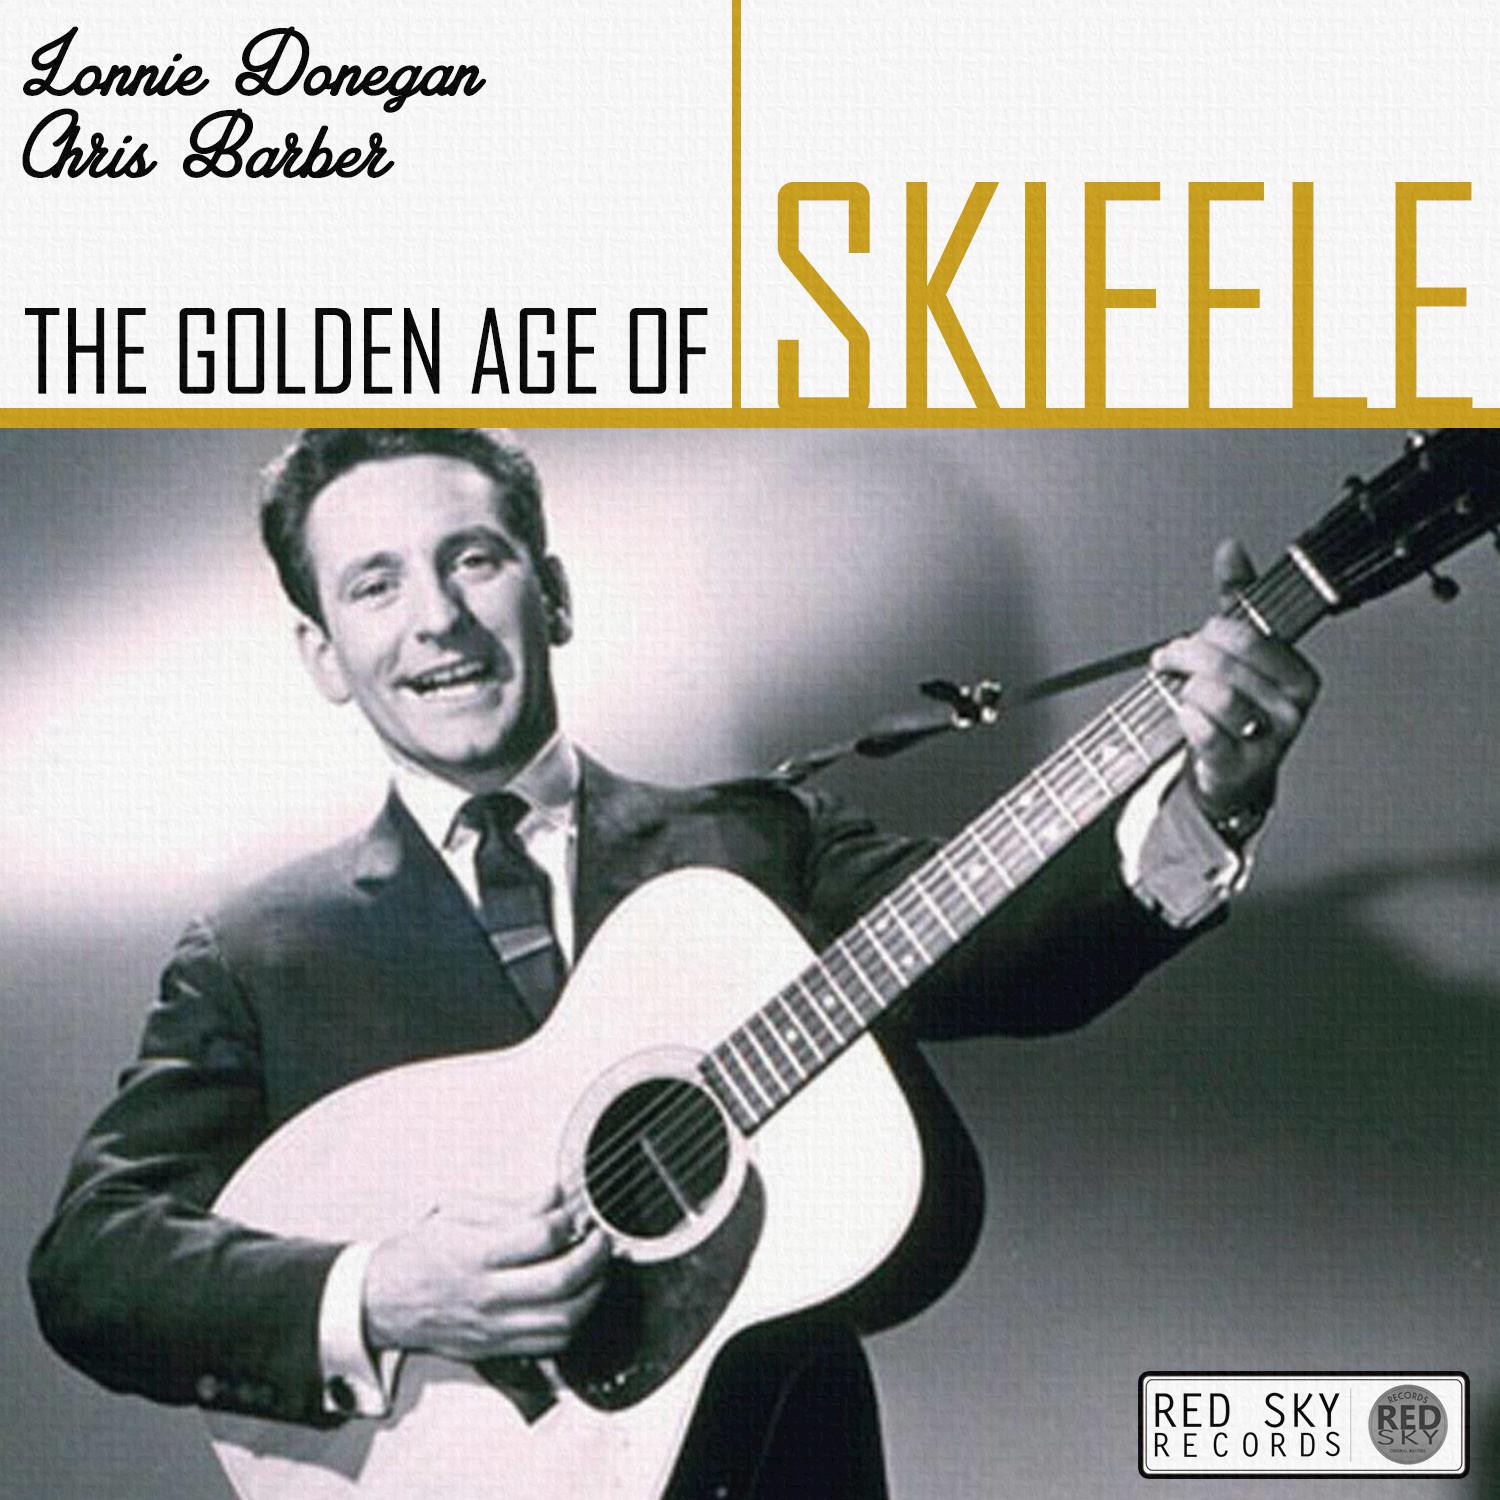 The Golden Age of Skiffle